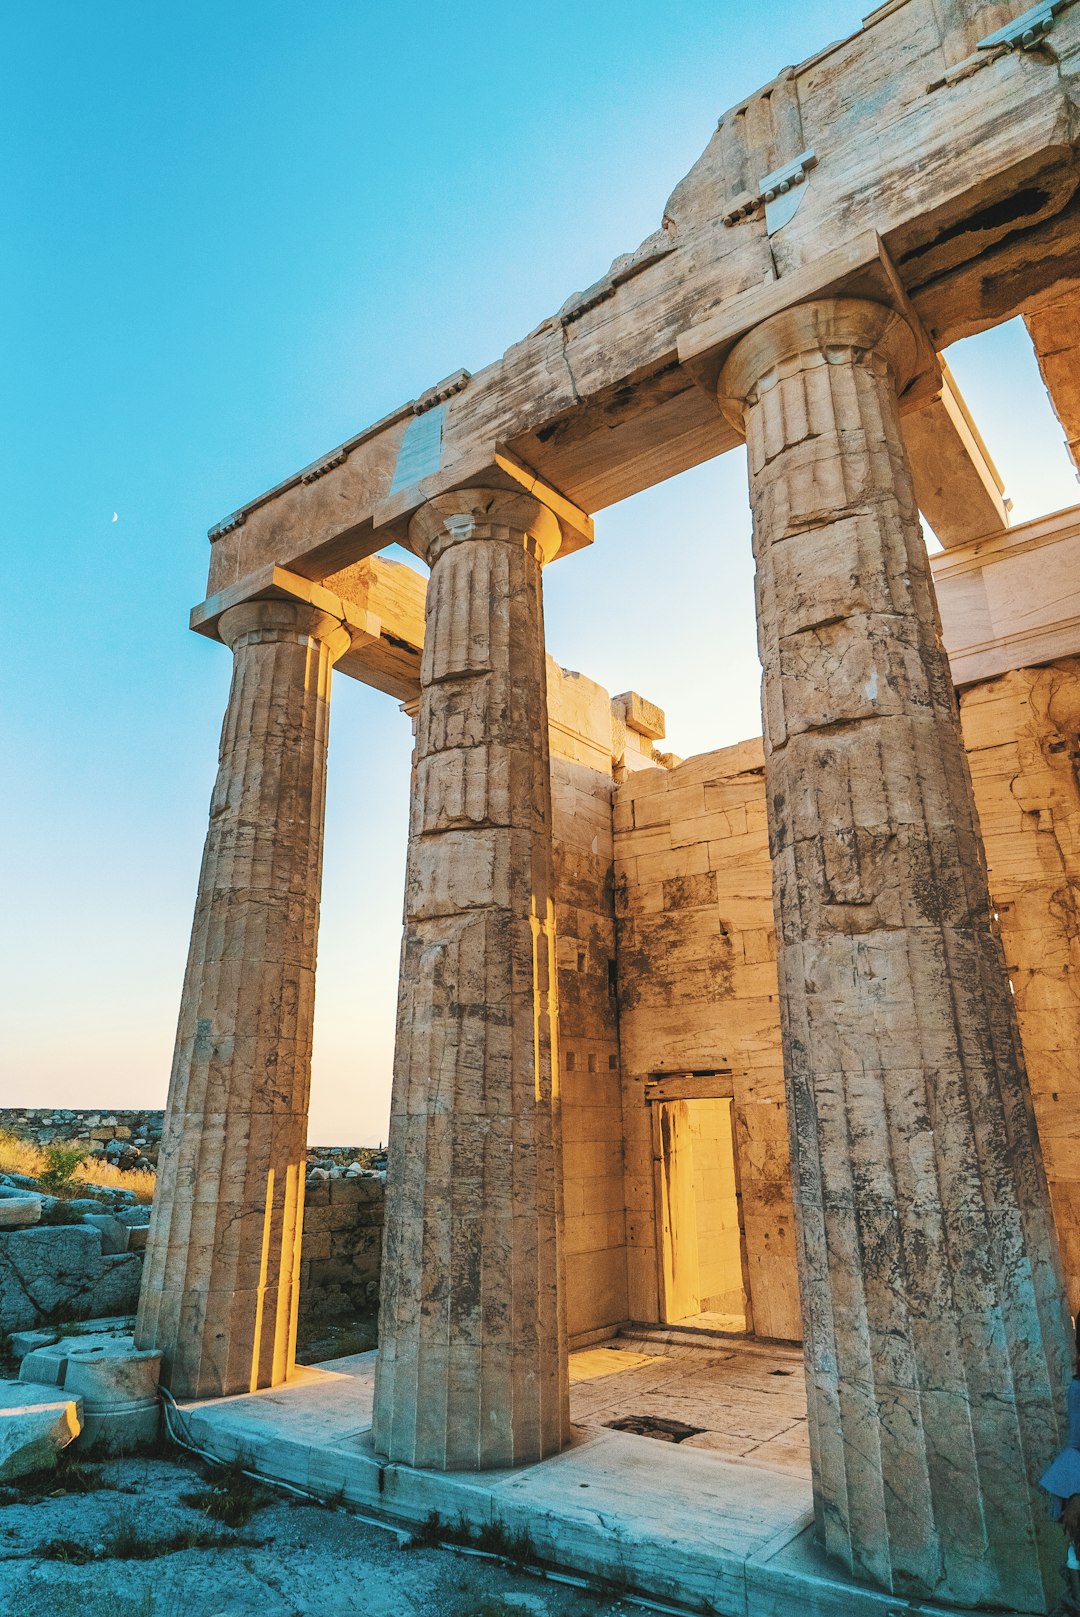 Travel Tips and Stories of Parthenon in Greece